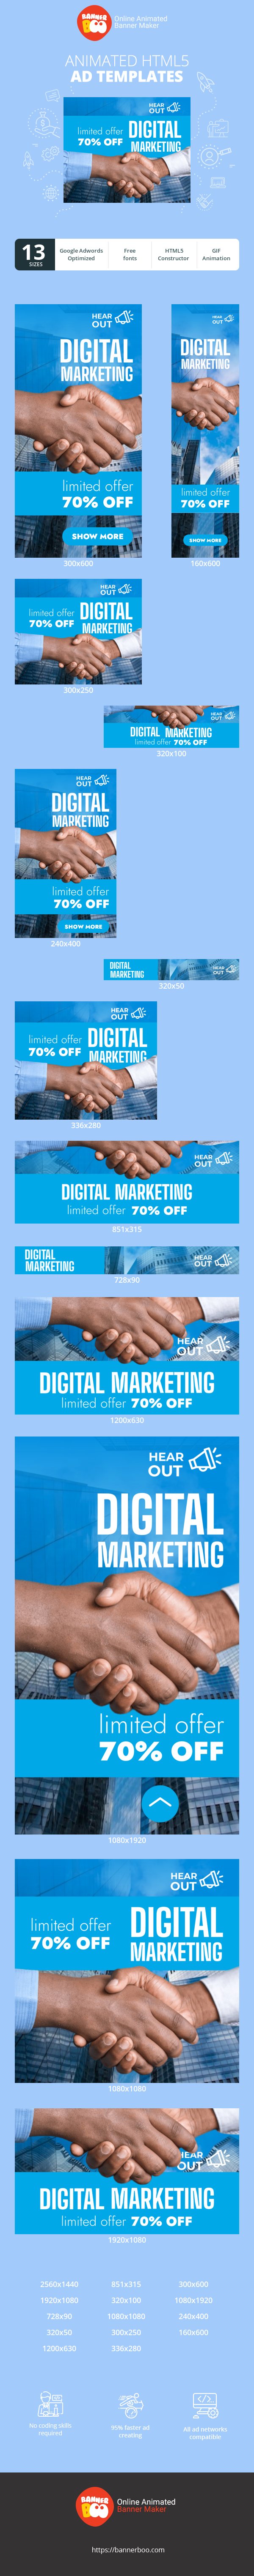 Banner ad template — Digital Marketing — Limited Offer 70% Off